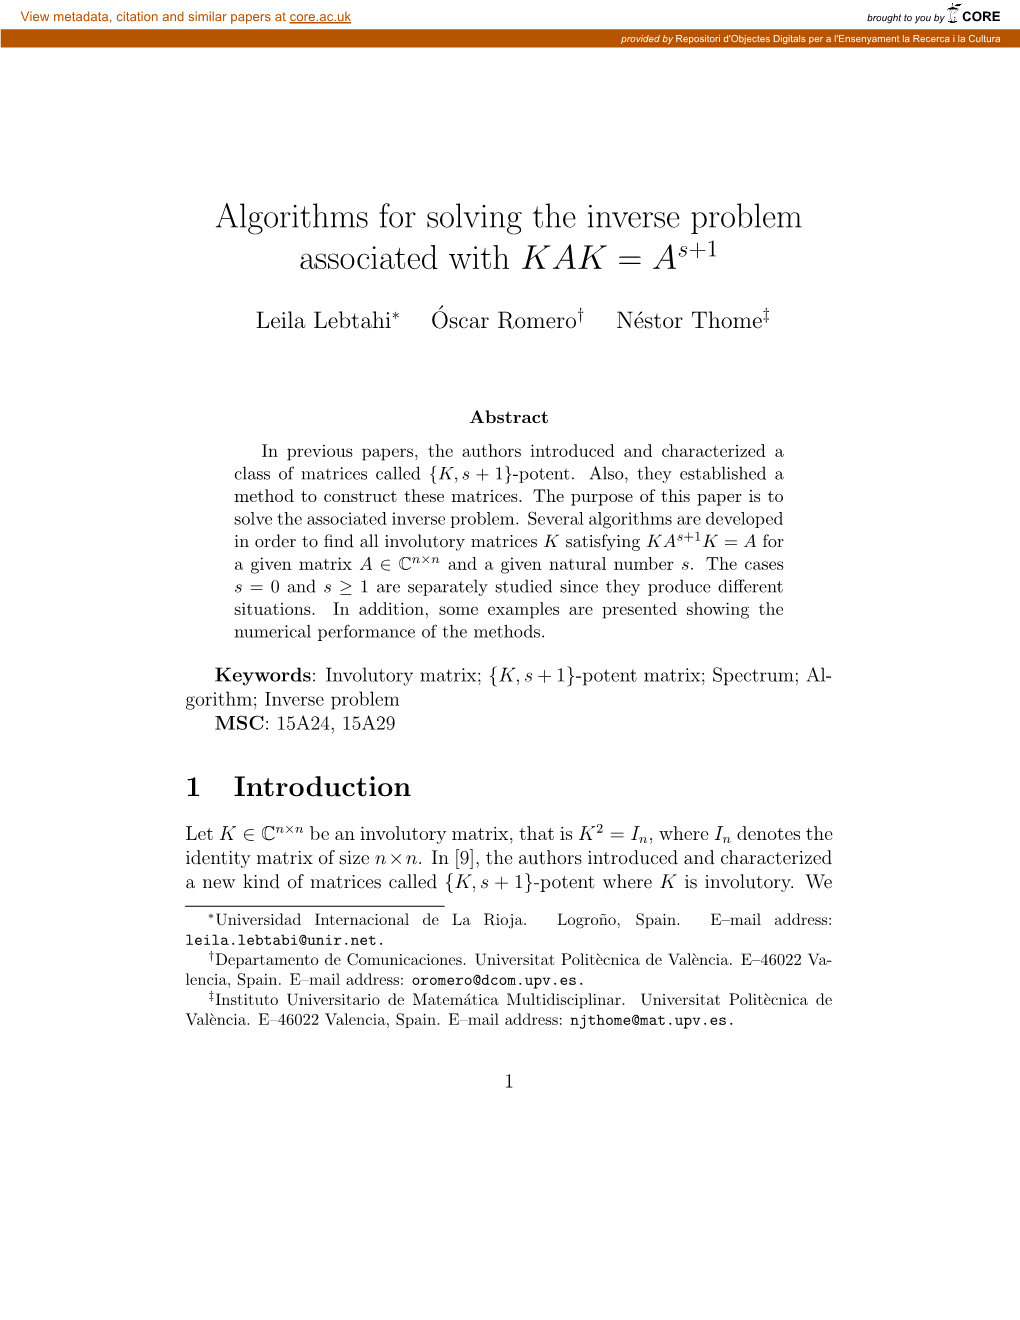 Algorithms for Solving the Inverse Problem Associated with KAK = As+1